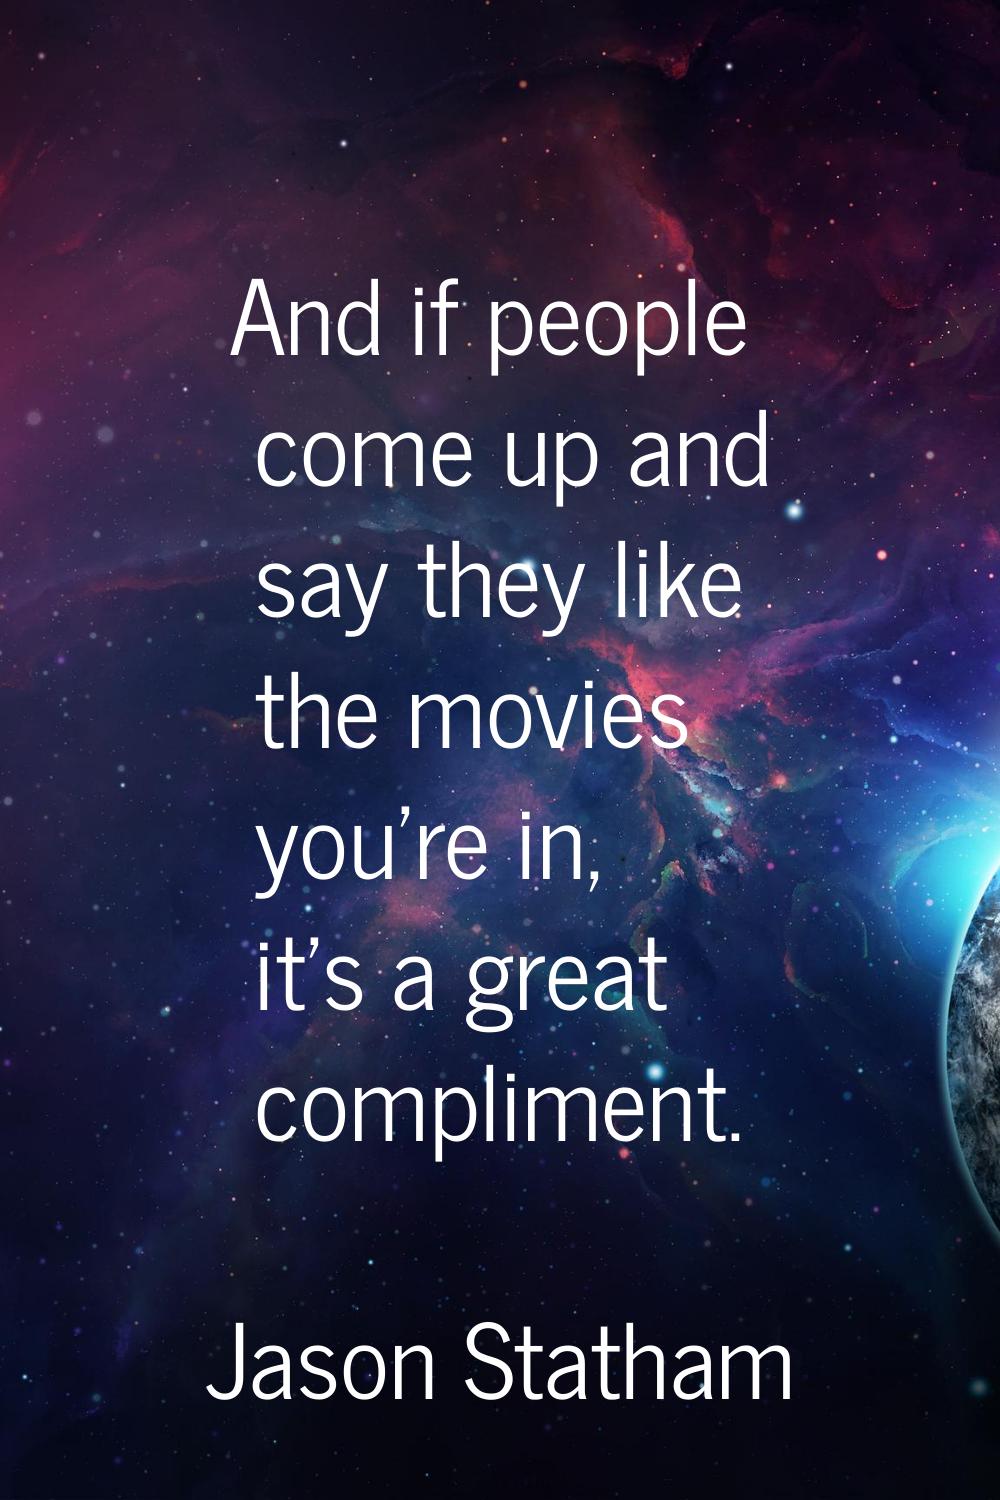 And if people come up and say they like the movies you're in, it's a great compliment.